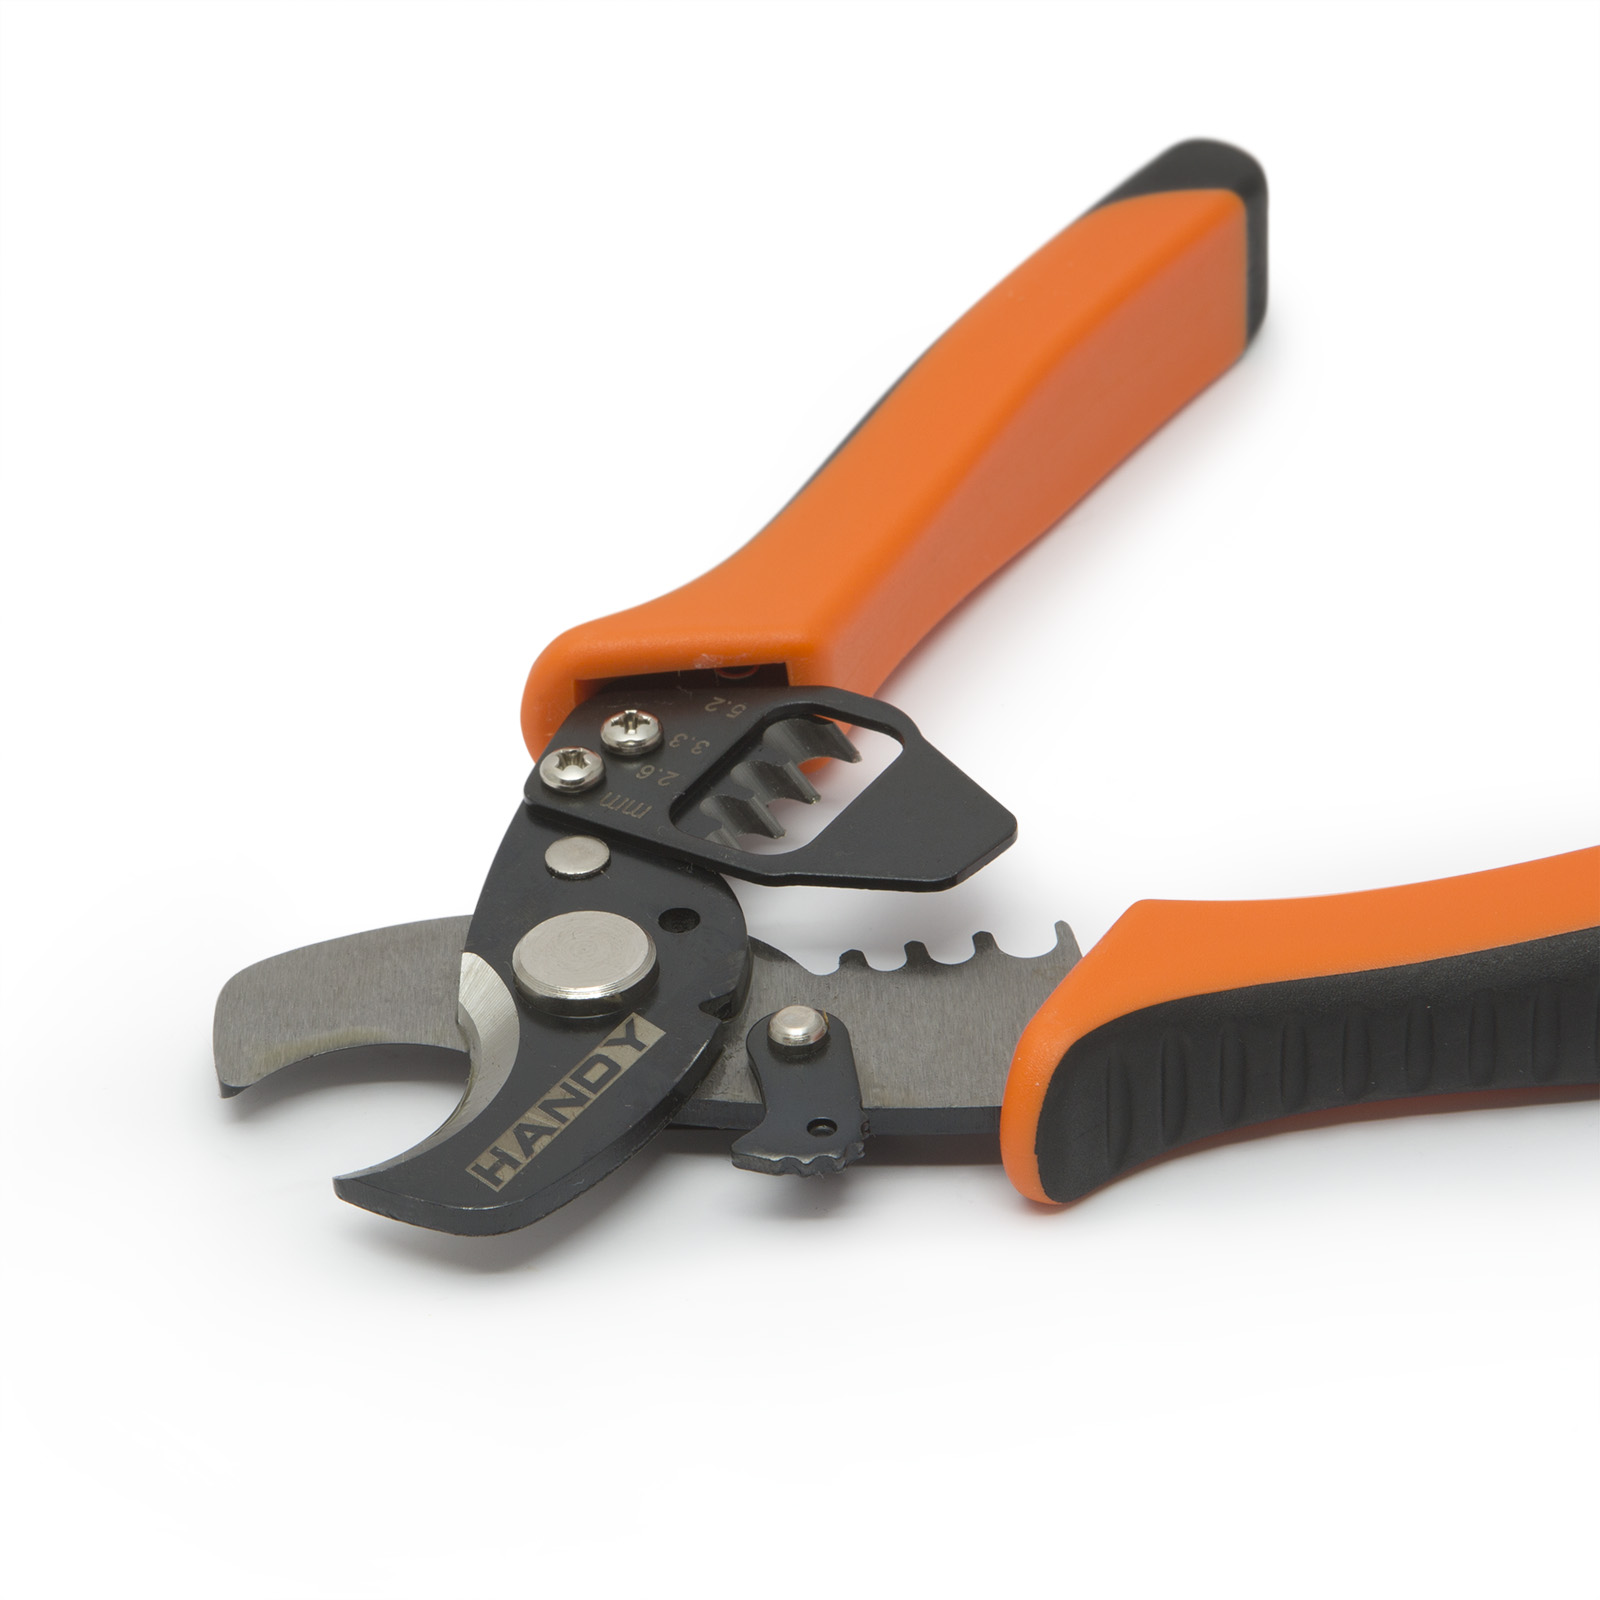 Cable Stripper and Cutter thumb